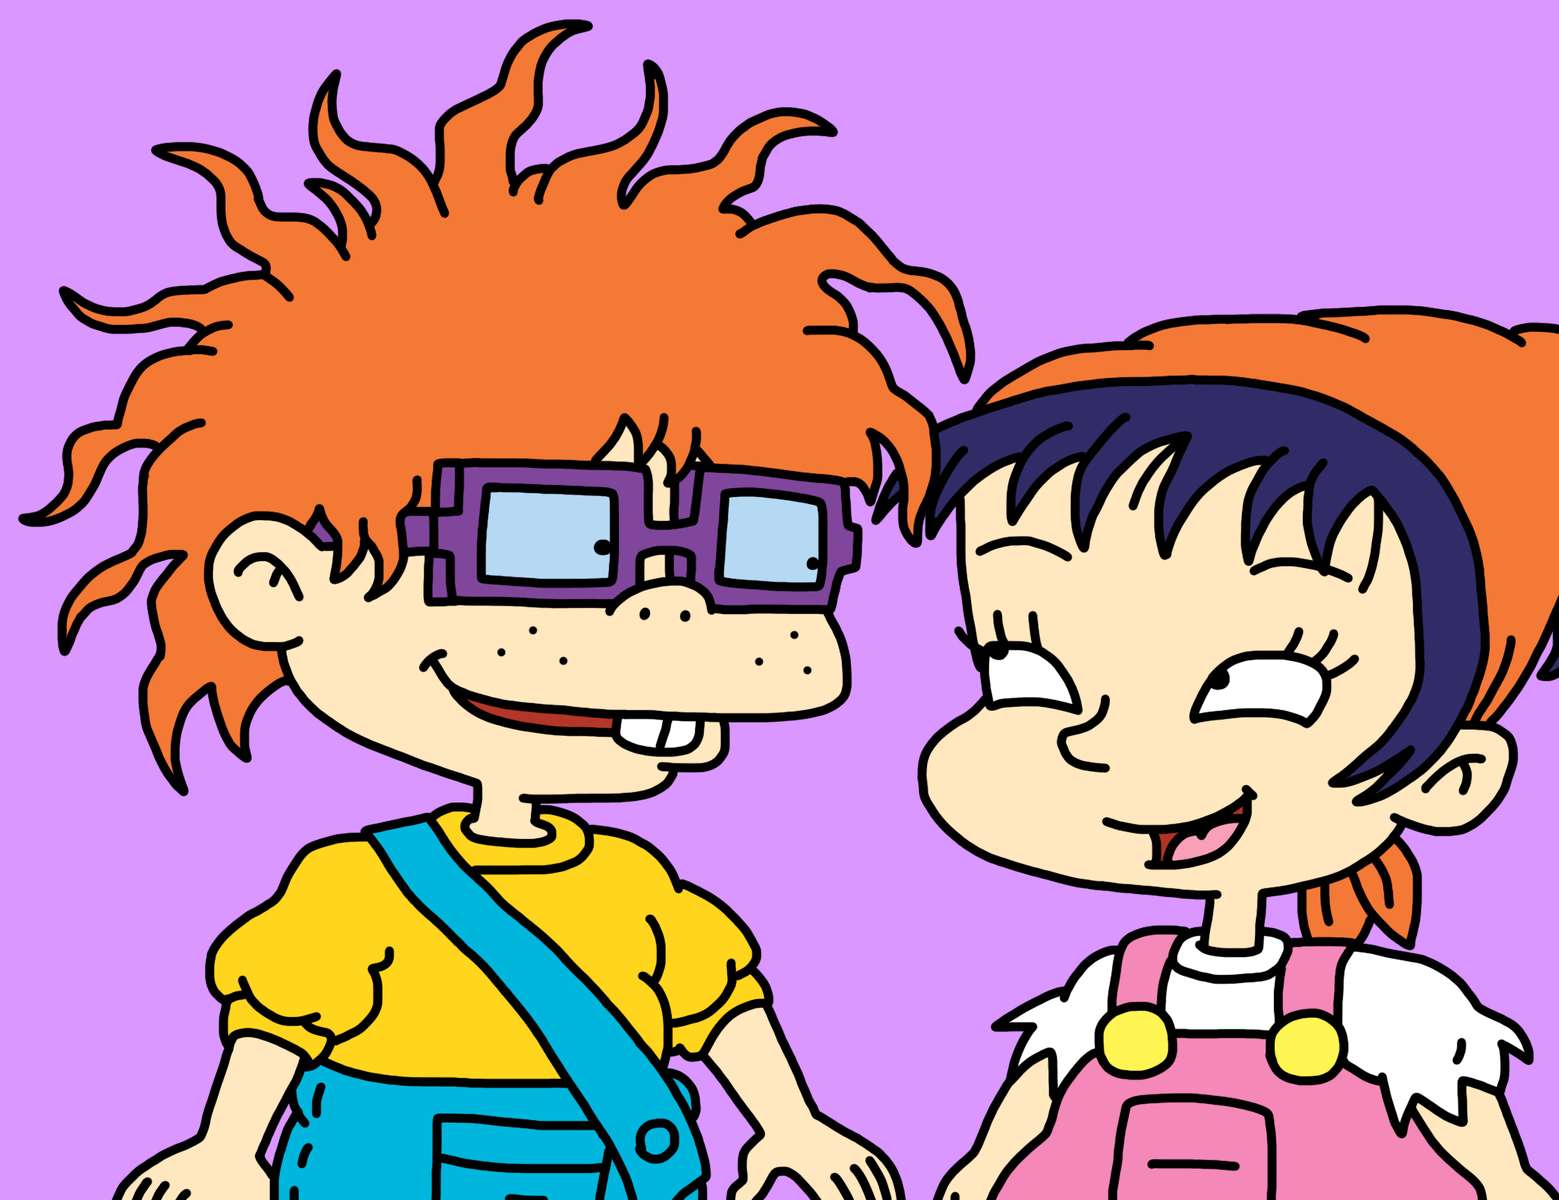 Chuckie i Kimi Finster❤️❤️❤️❤️❤️ puzzle online